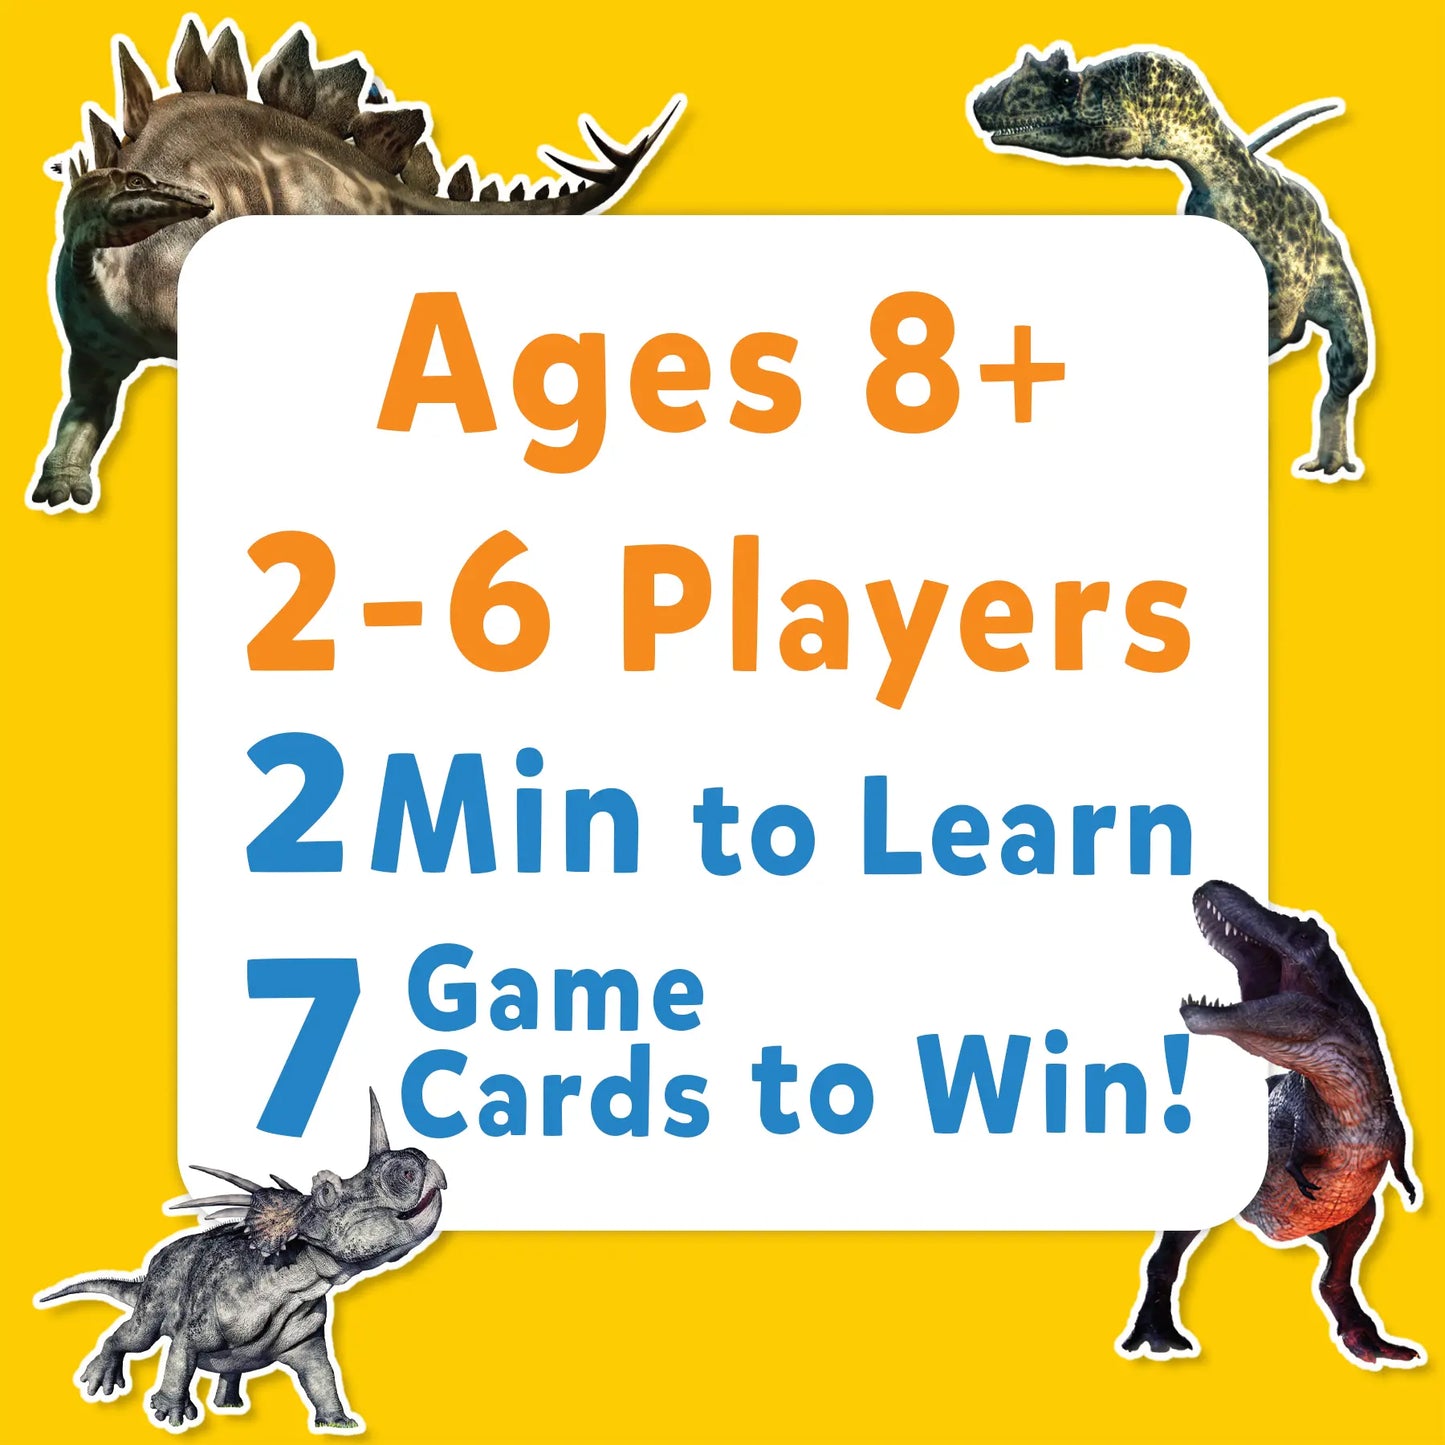 Skillmatics Card Game - Guess in 10 World of Dinosaurs, for Ages 8 and Up